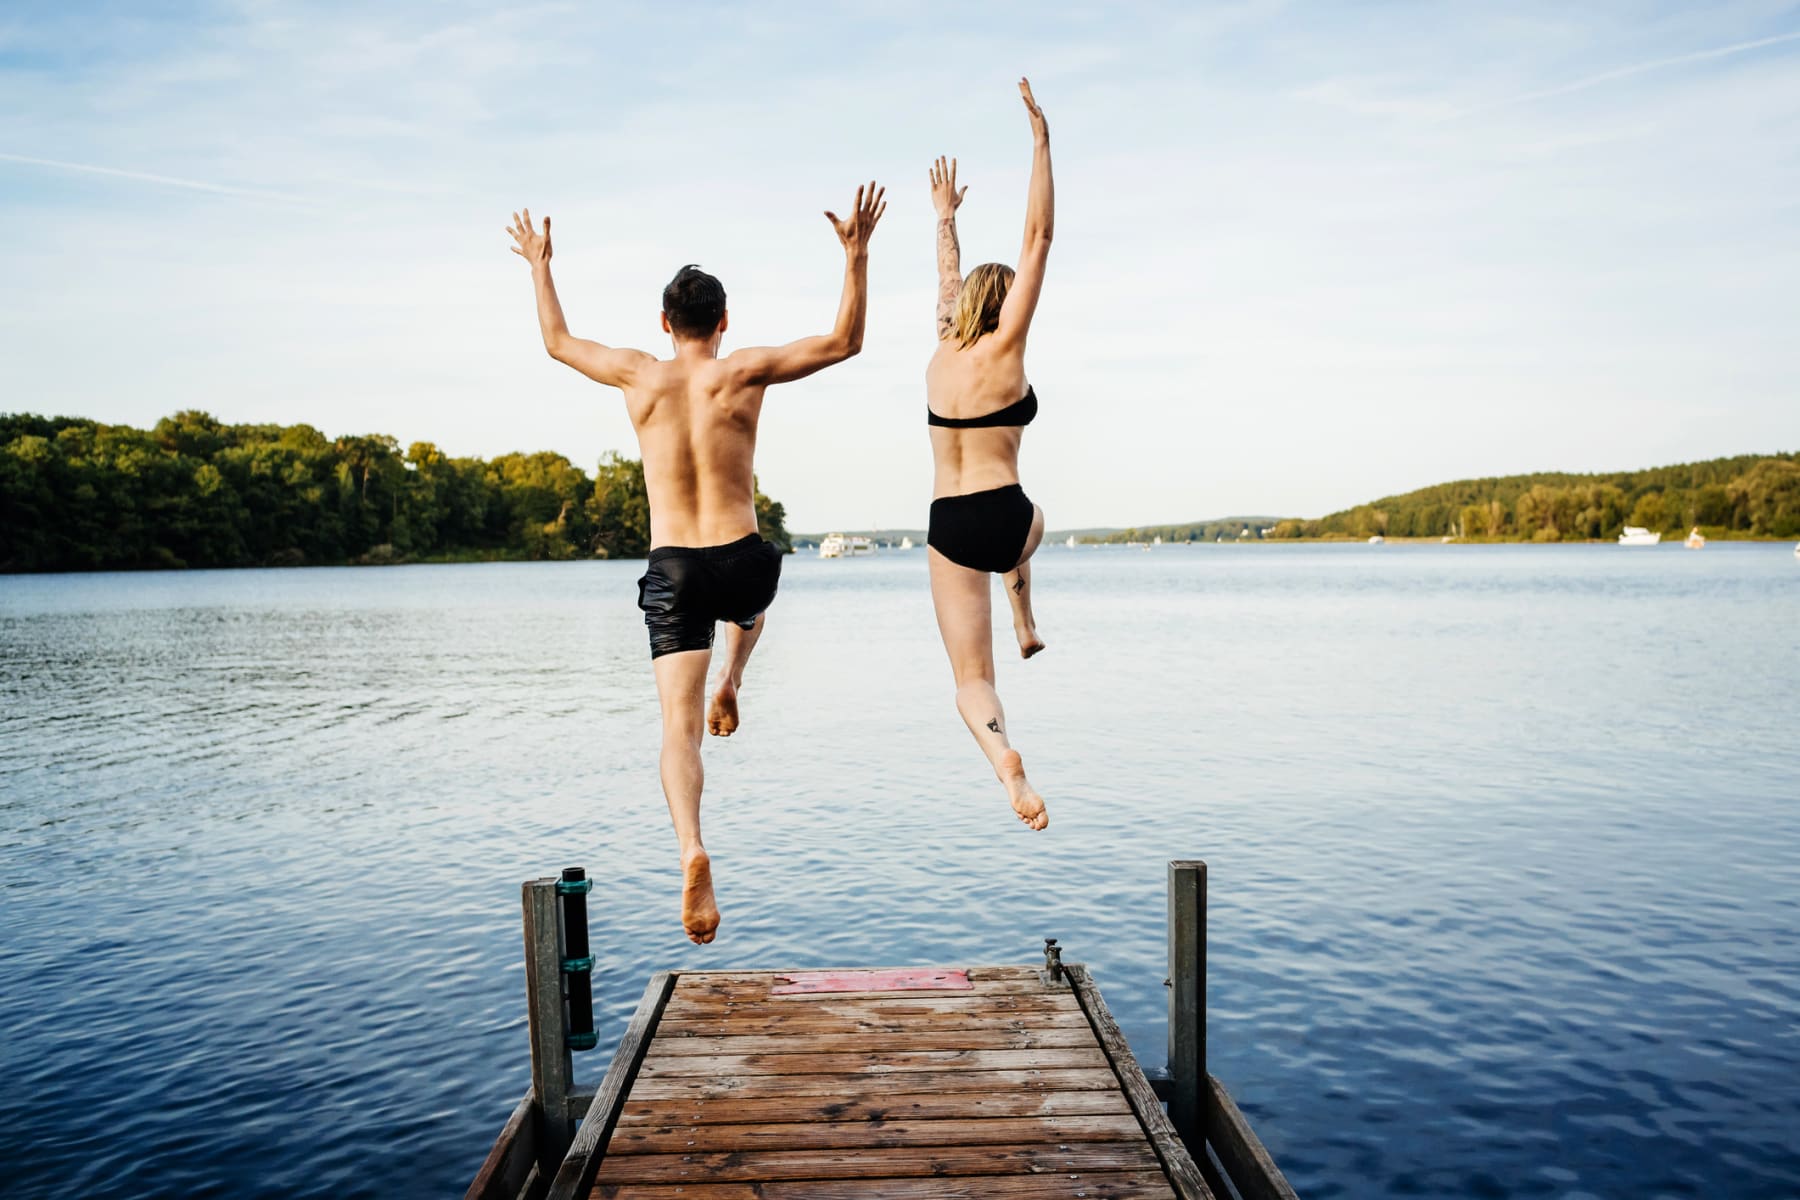 Two people jumping into lake